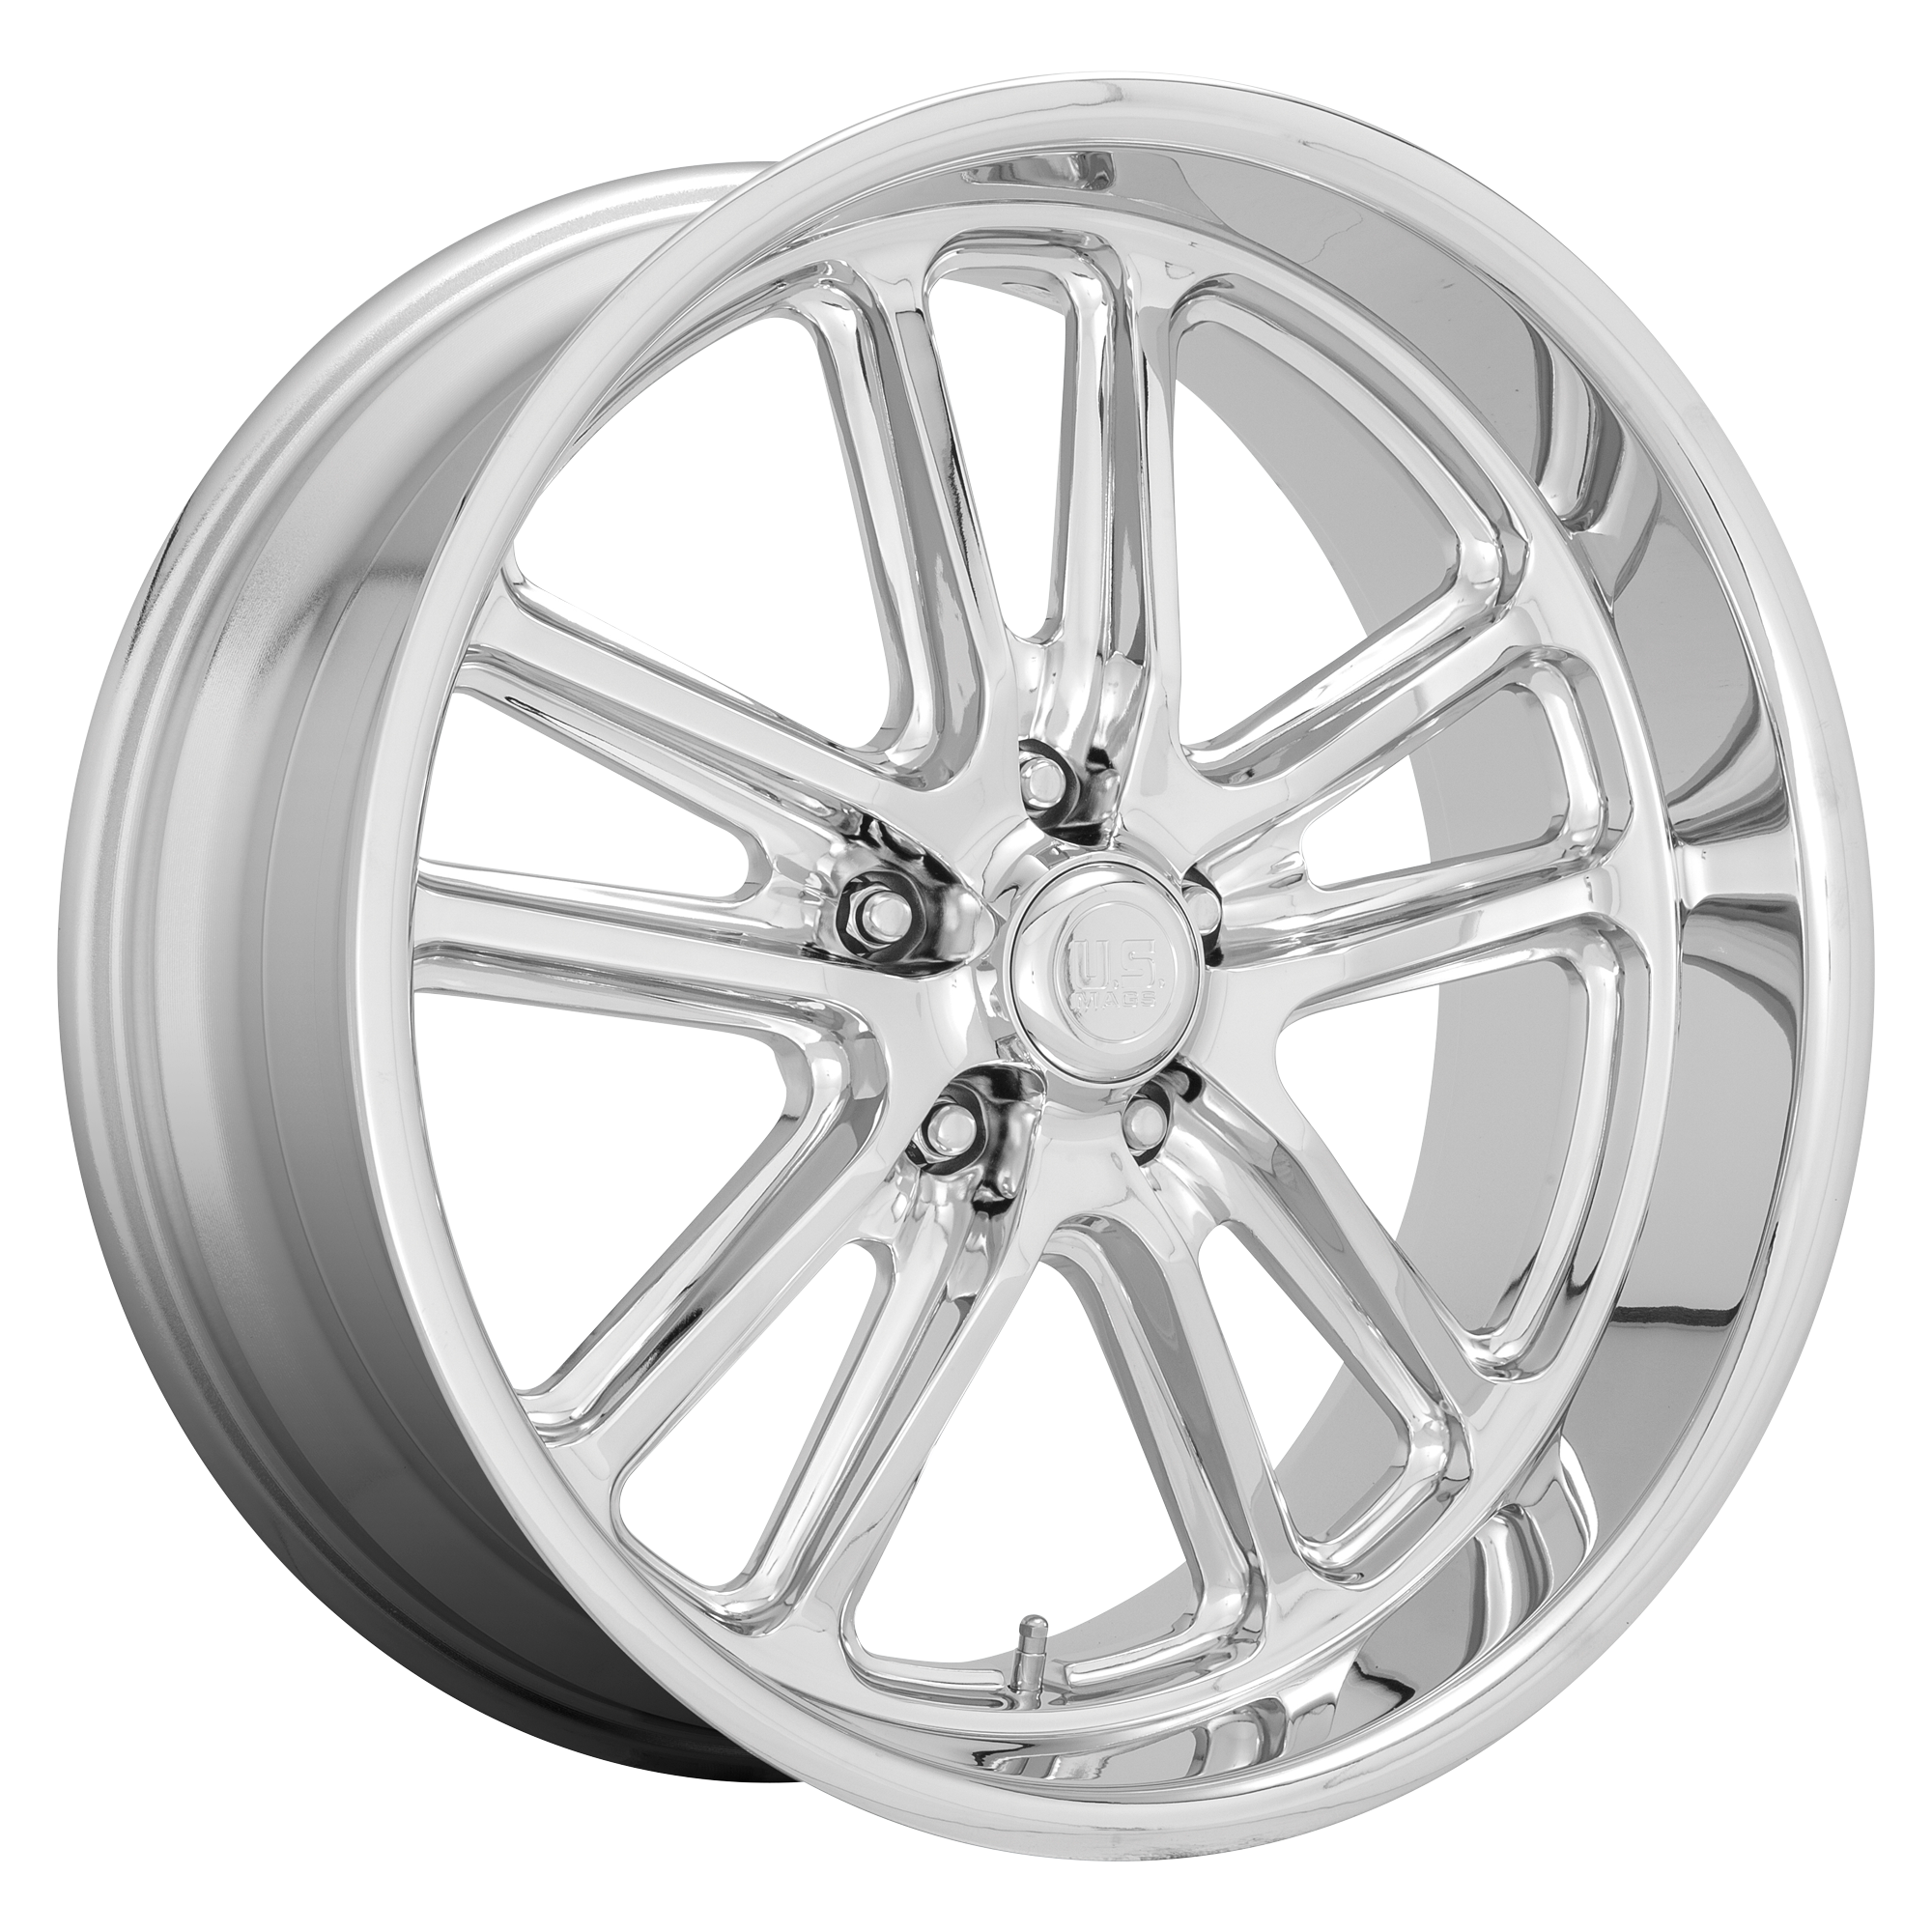 BULLET 20x9.5 5x120.65 CHROME (1 mm) - Tires and Engine Performance